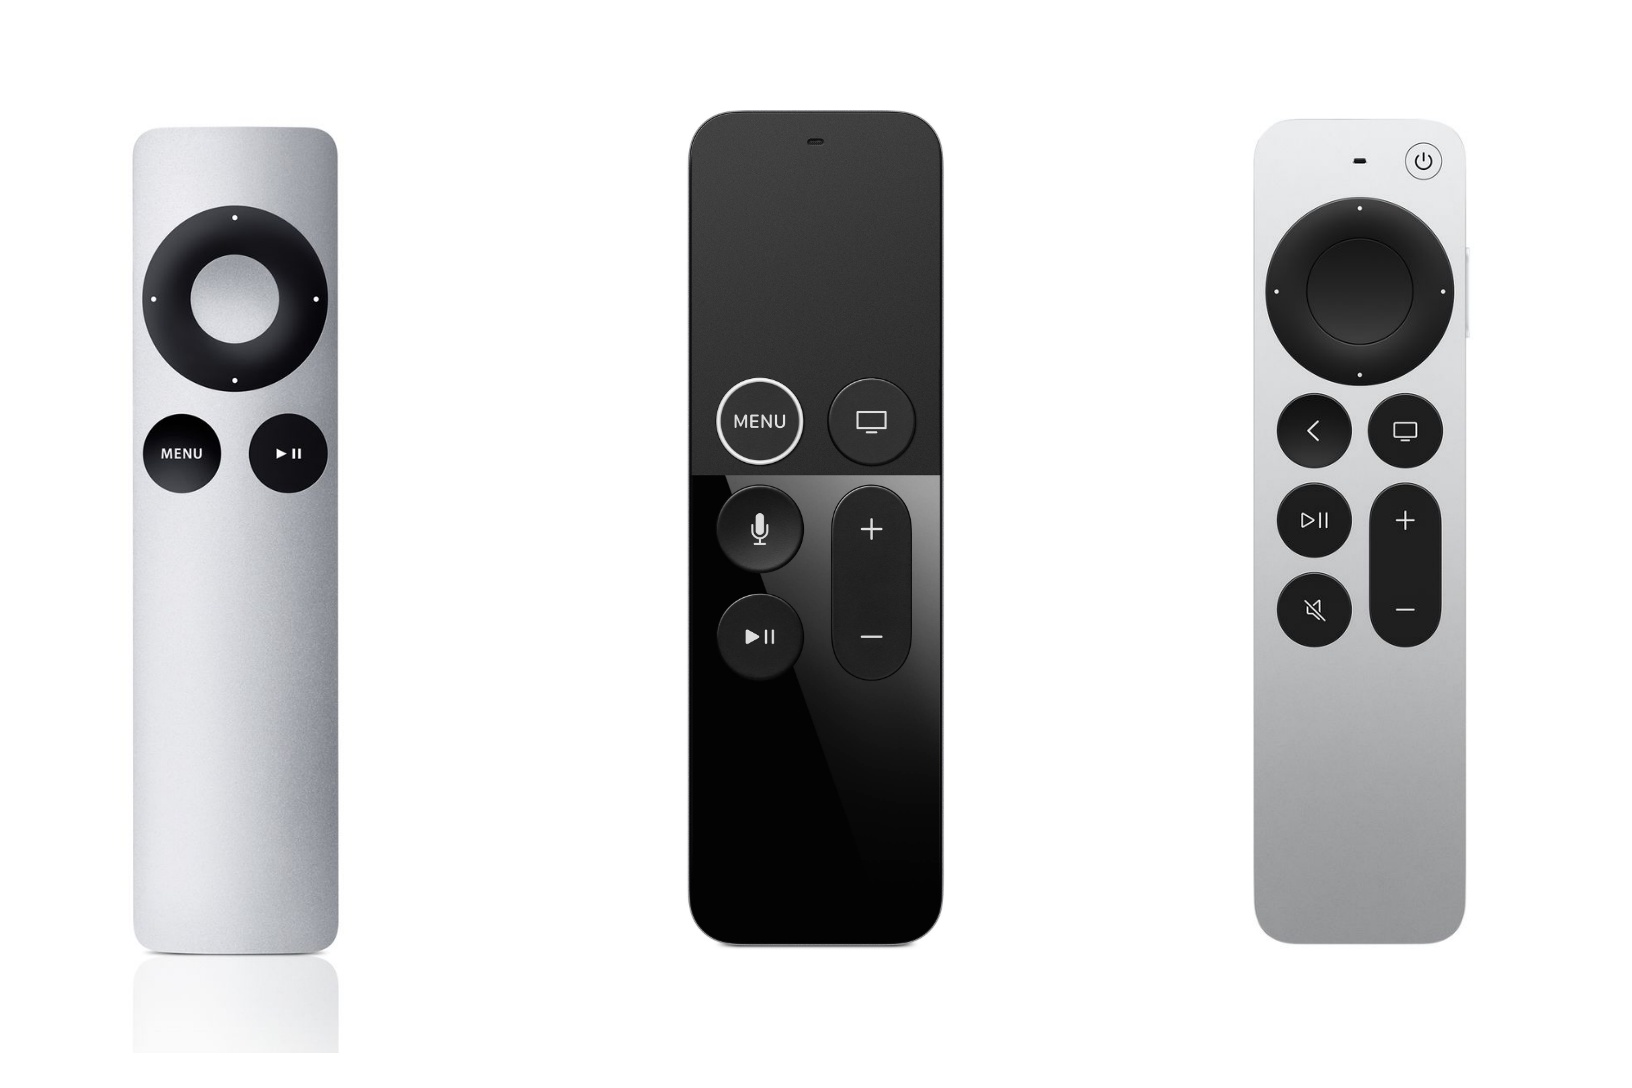 Slange Kan ikke læse eller skrive Celebrity Apple and Roku have newly upgraded streaming remotes—are they worth buying?  | Ars Technica